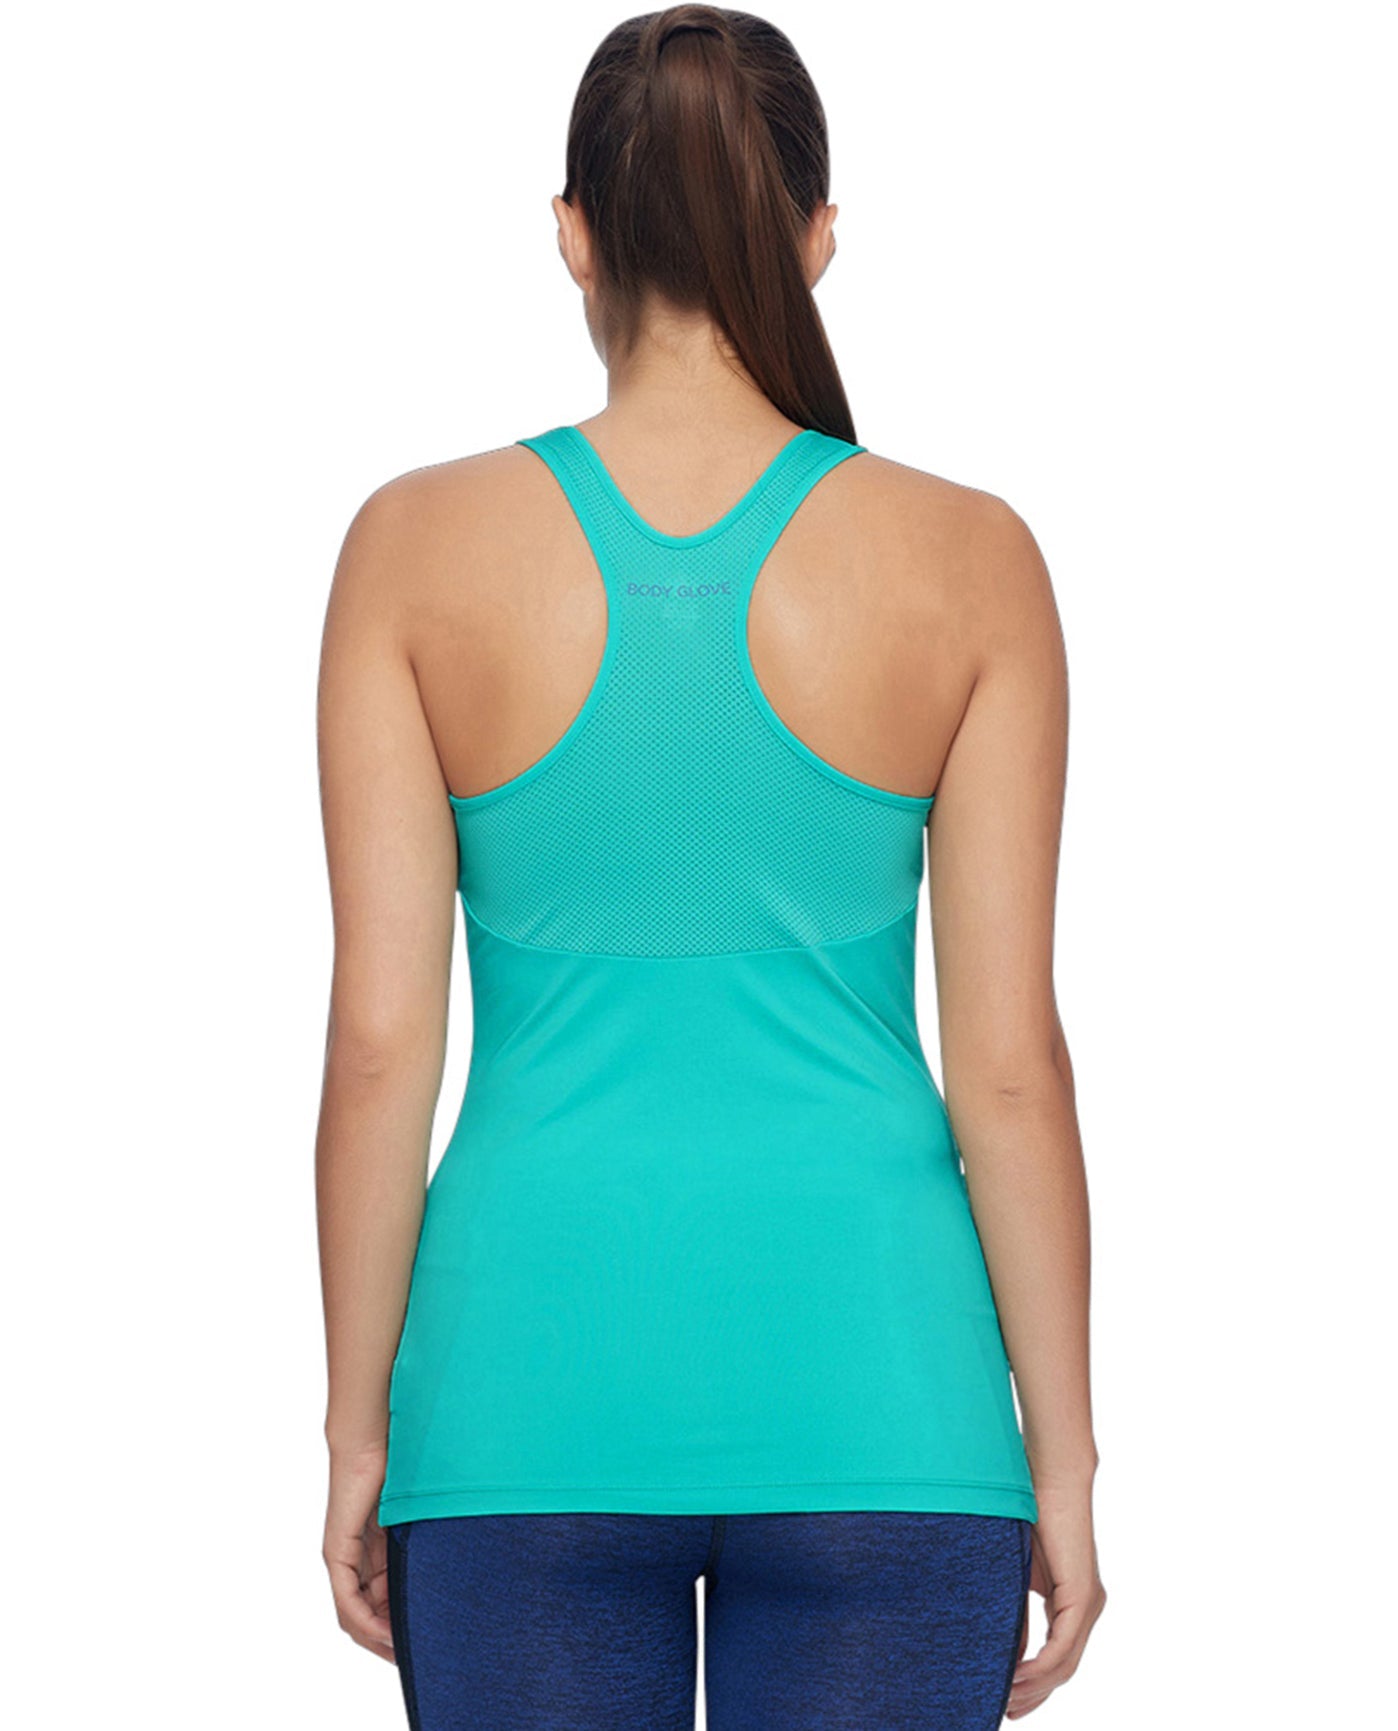 Back View Of Body Glove Sport Pali Relaxed Fit Tank Top | BGS Pali Mint